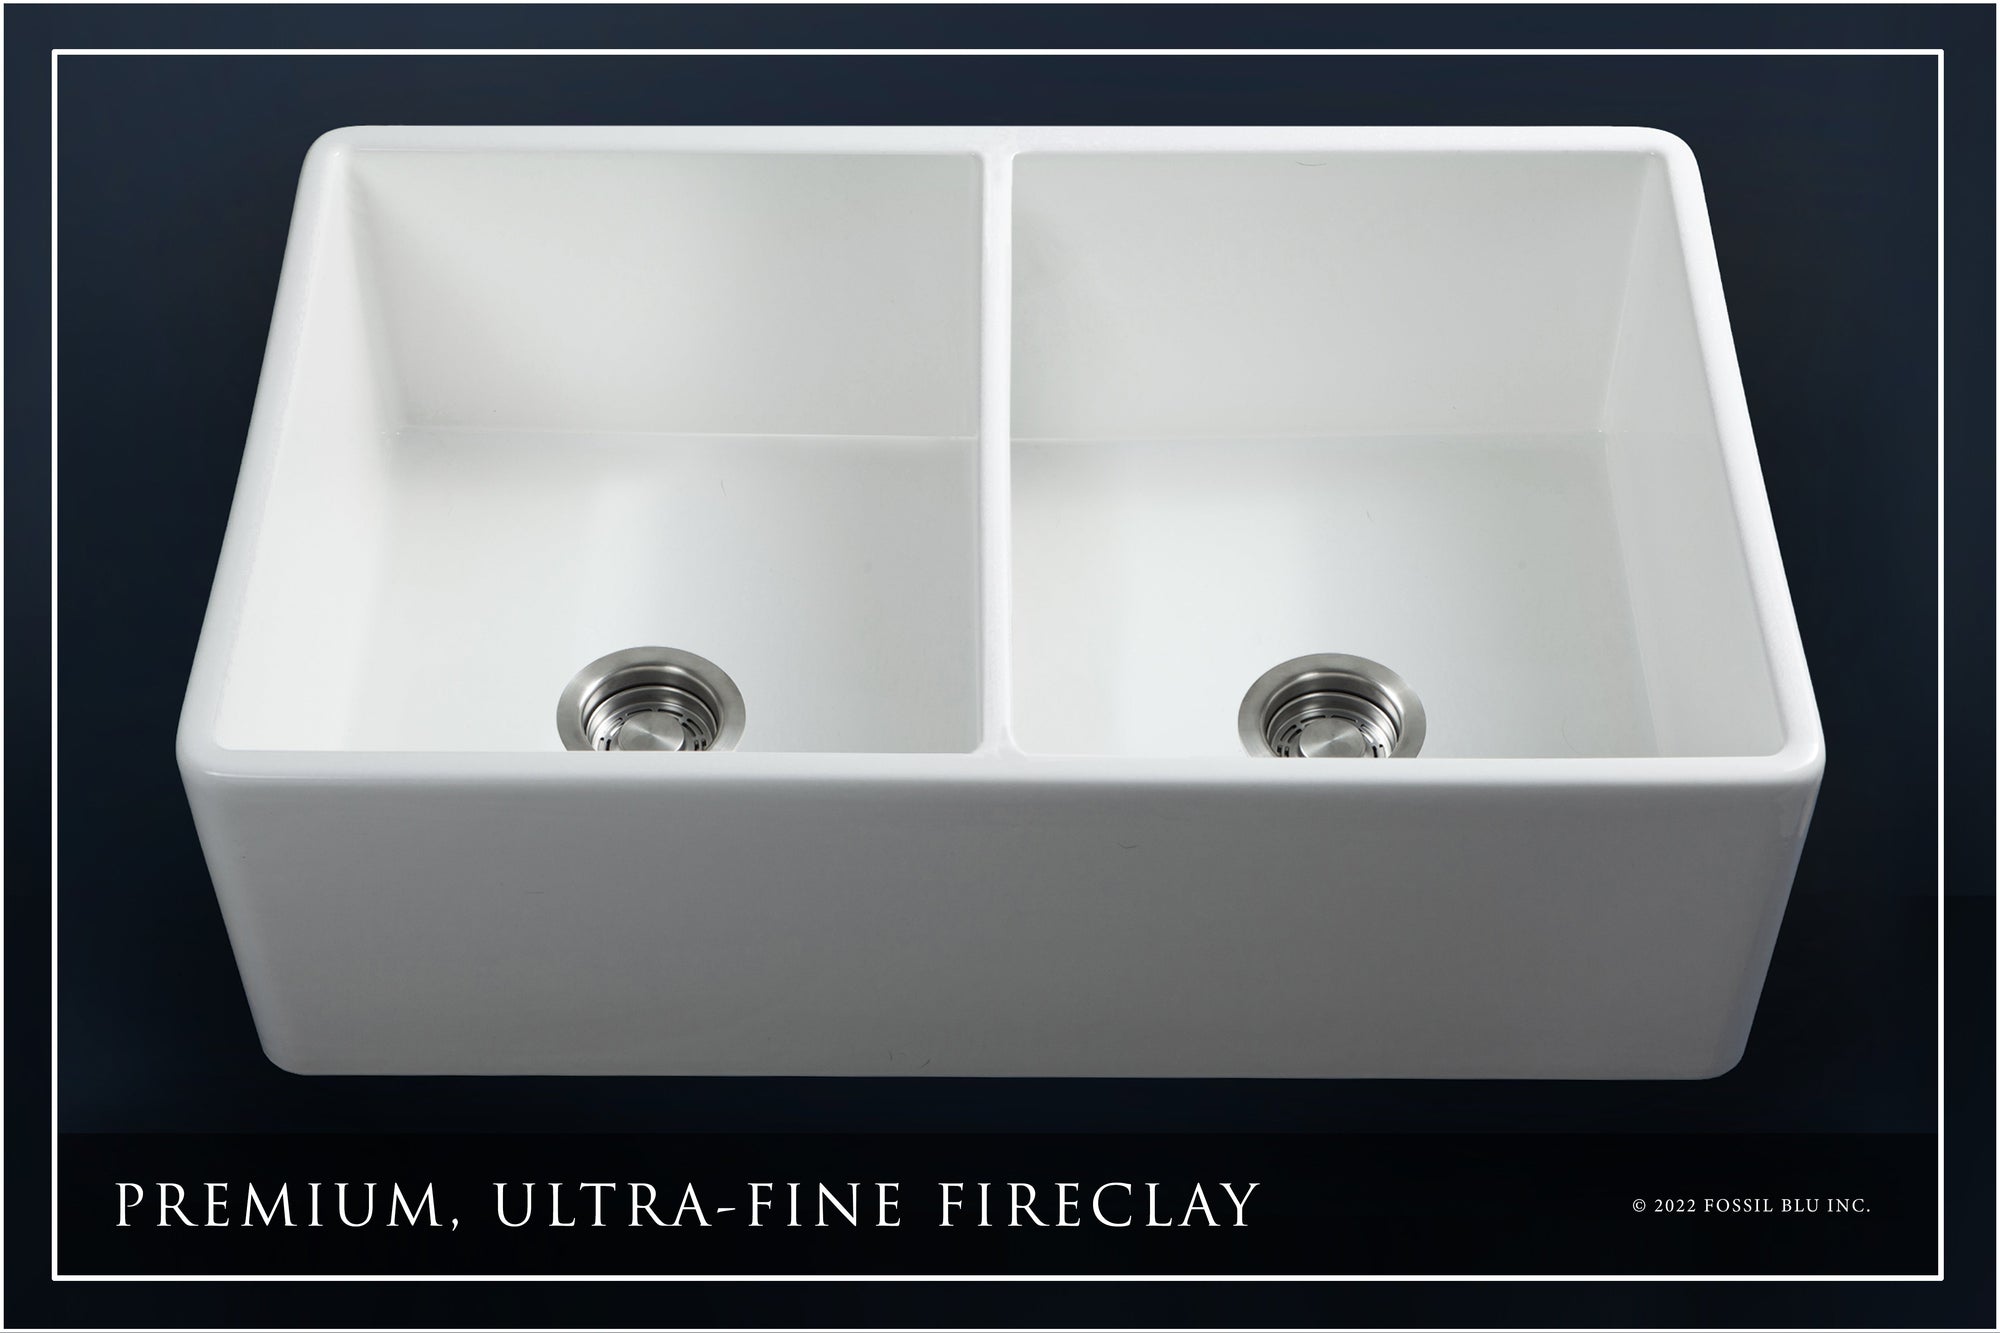 FSW1003 LUXURY 33-INCH SOLID FIRECLAY FARMHOUSE SINK IN WHITE, STAINLESS STEEL ACCS, FLAT FRONT